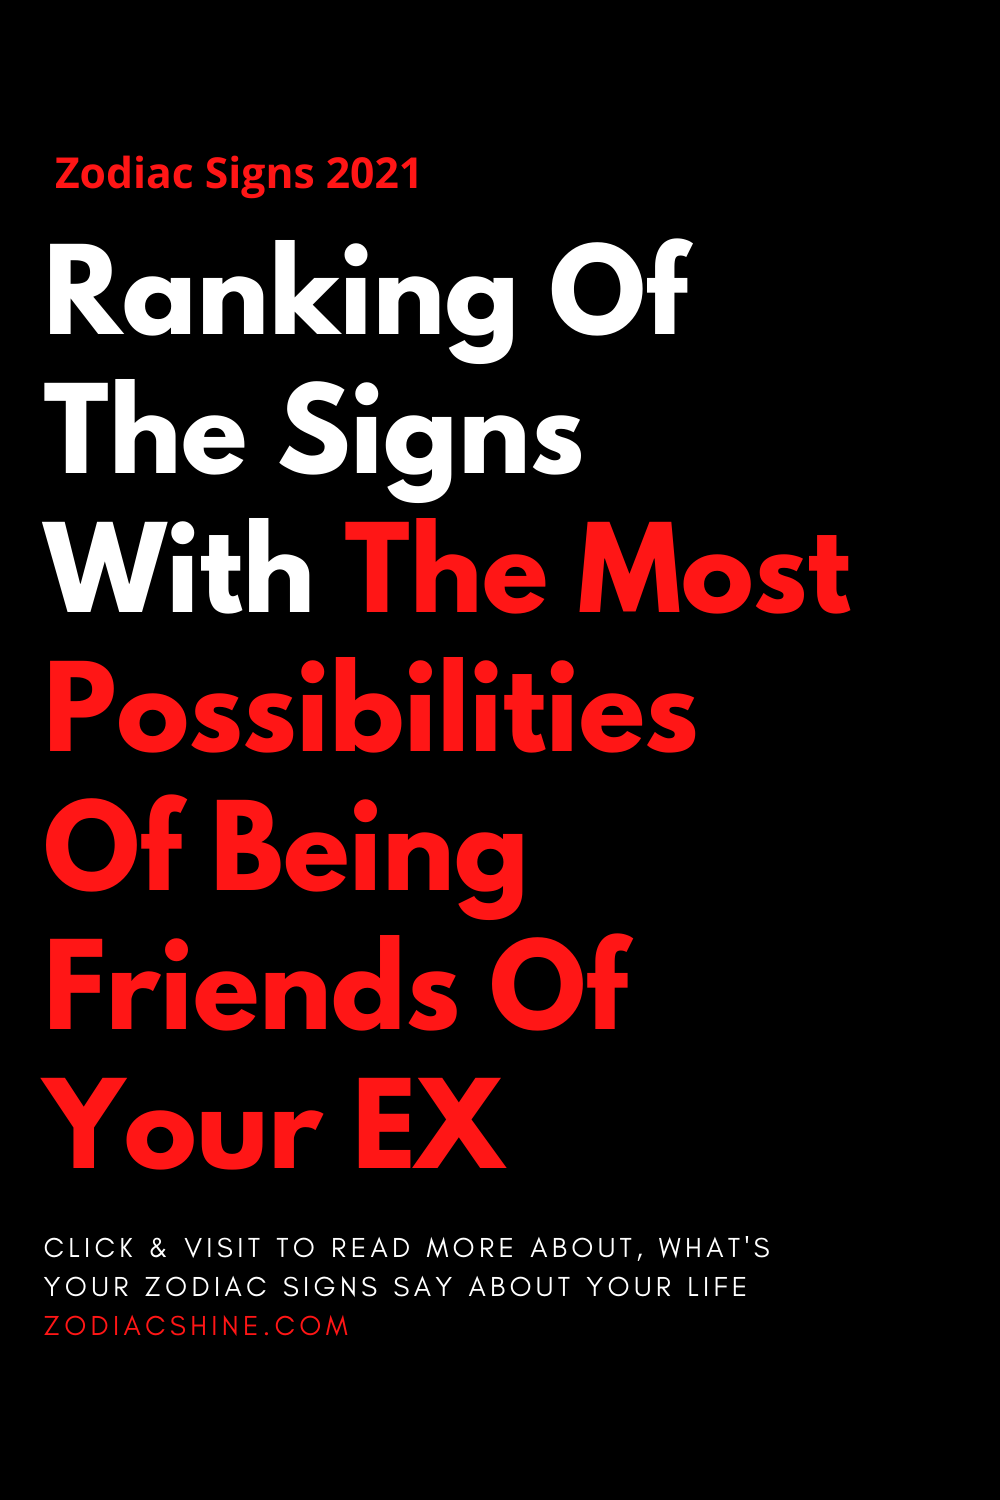 Ranking Of The Signs With The Most Possibilities Of Being Friends Of Your EX